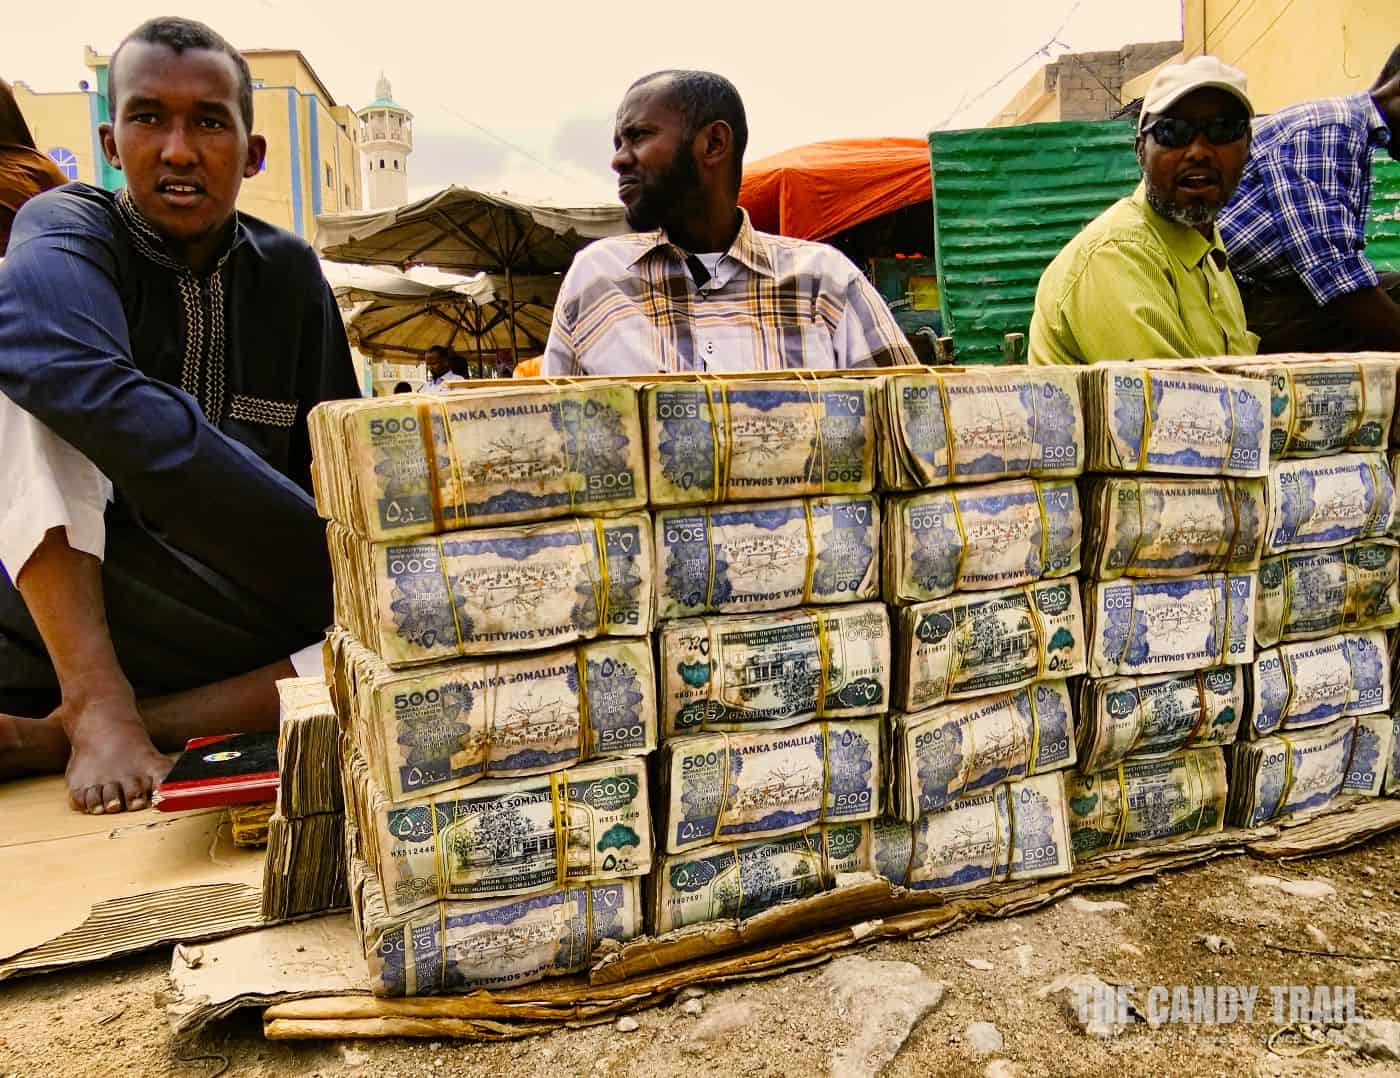 cash vendors with bundles of money in hargeisa market in Somaliland